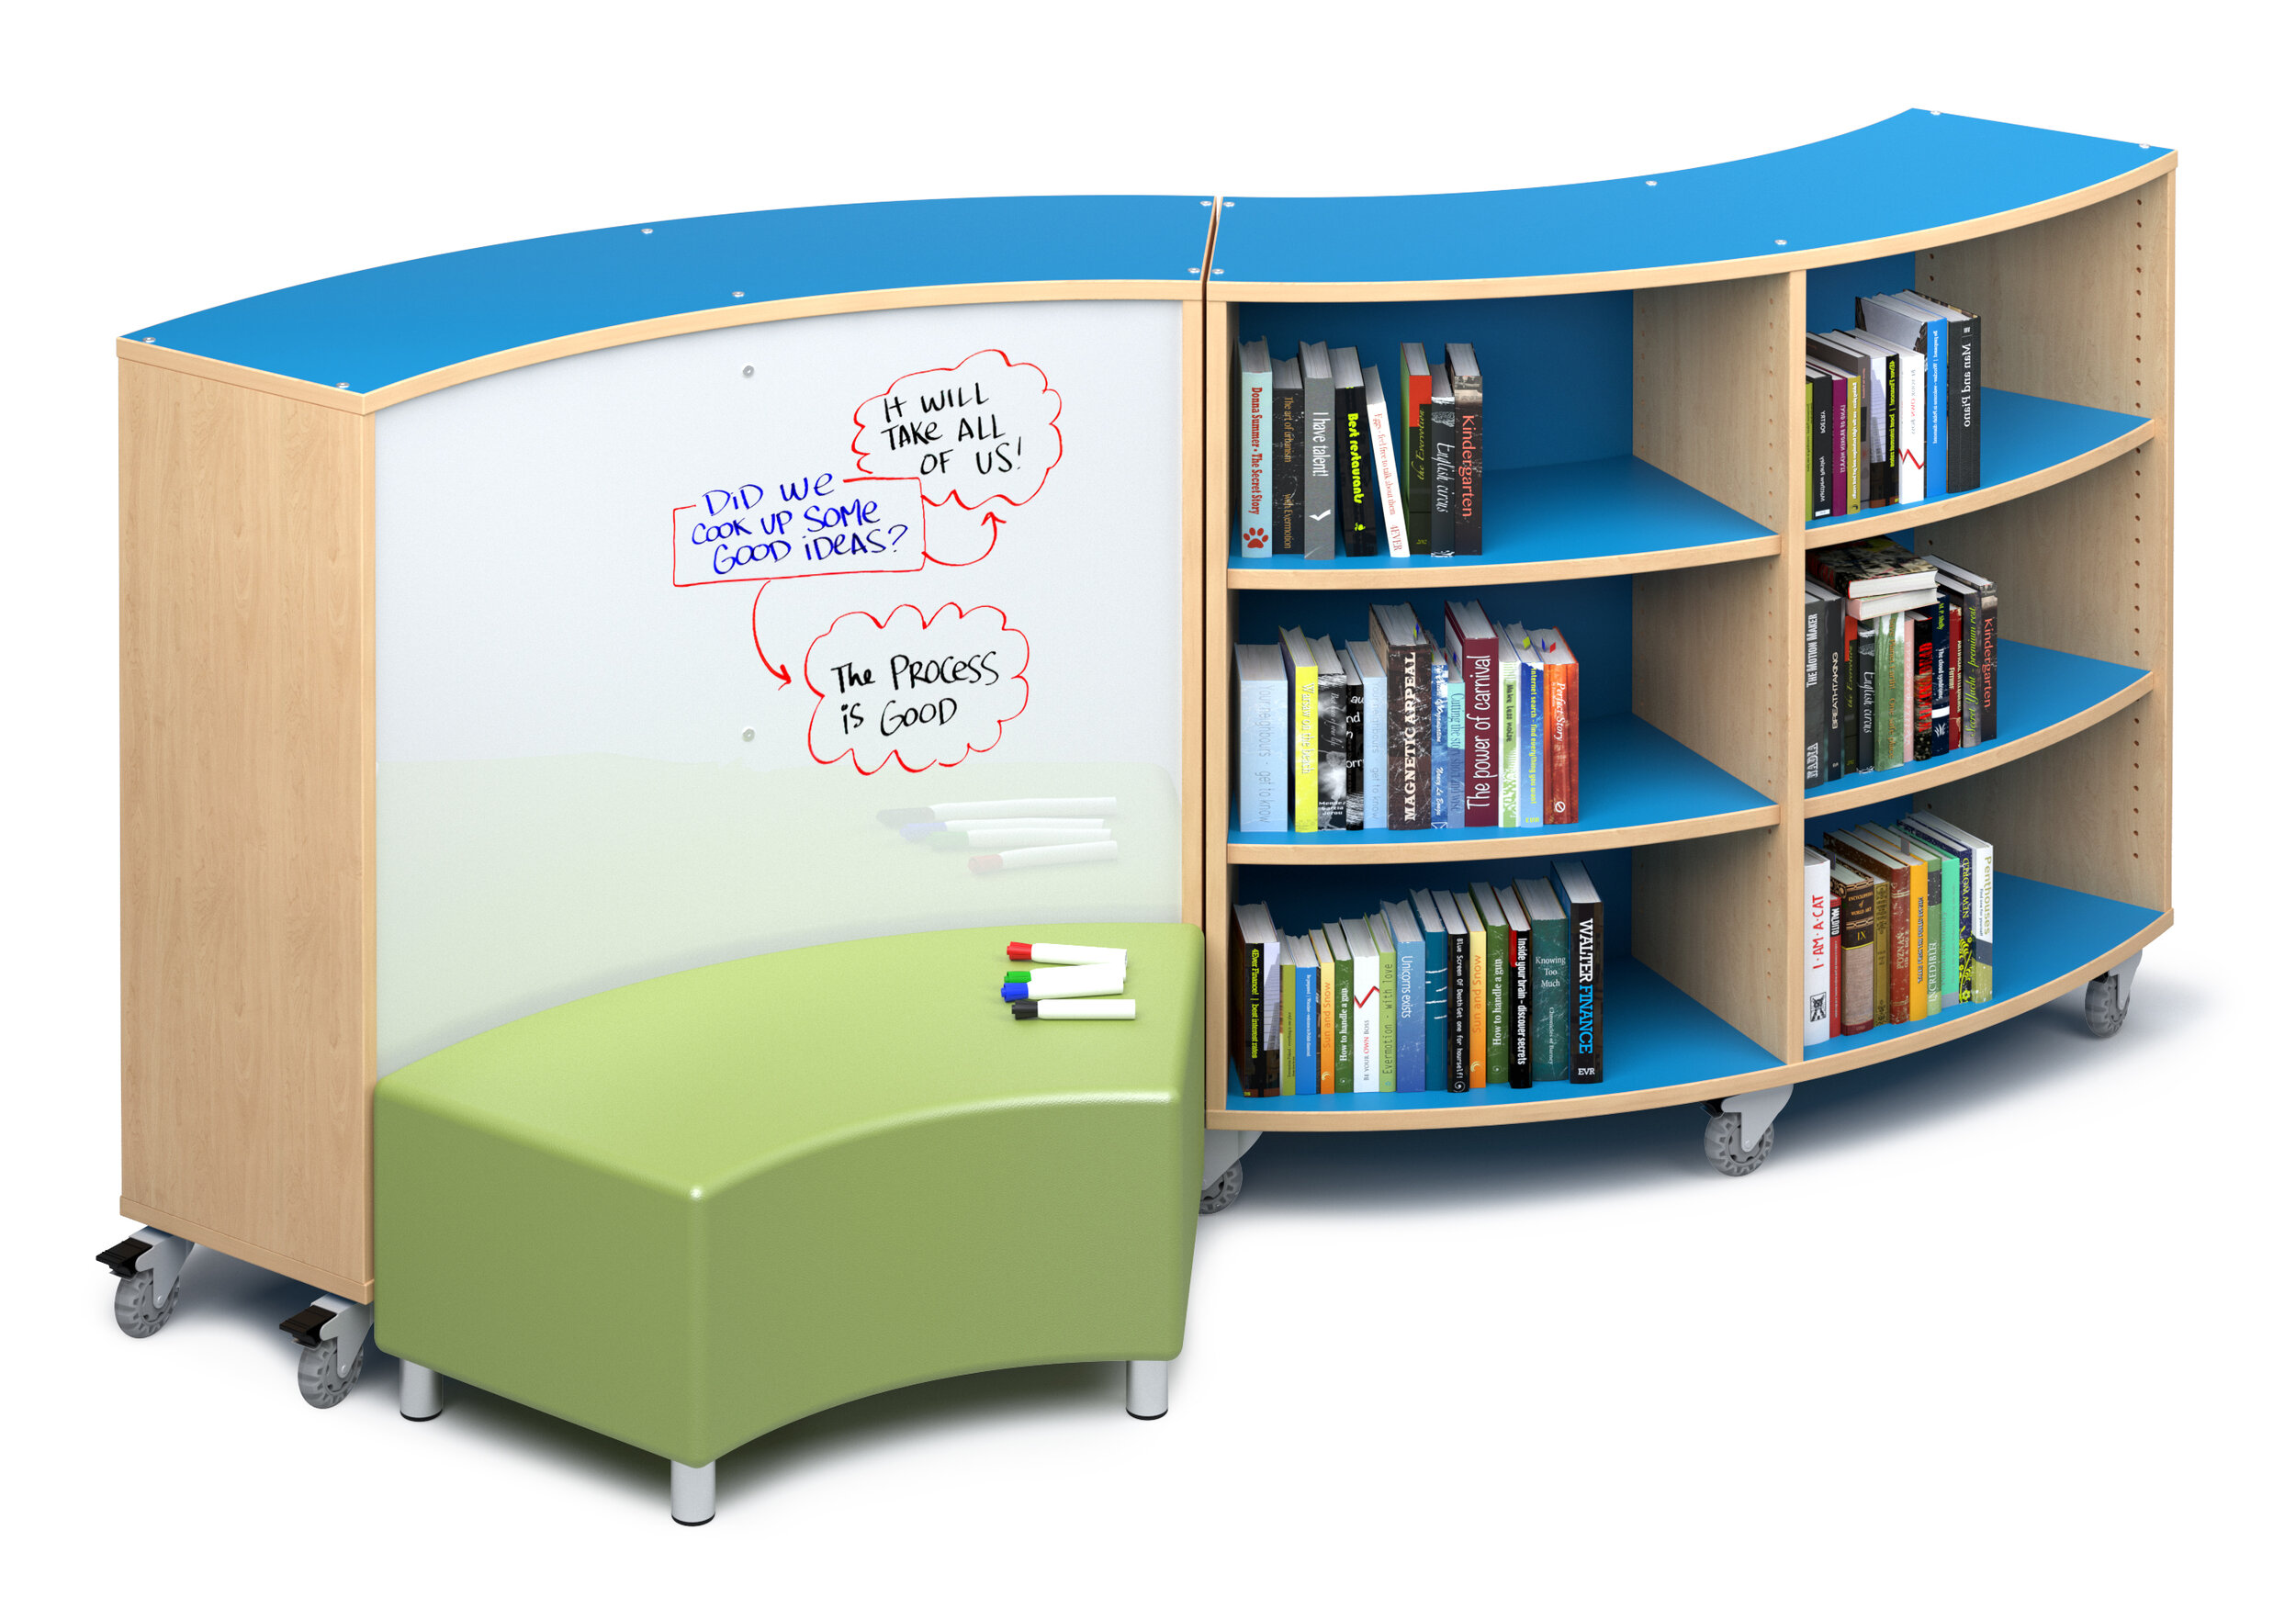 CURVED SHELVING - BENCHES - MARKER BOARD.JPG